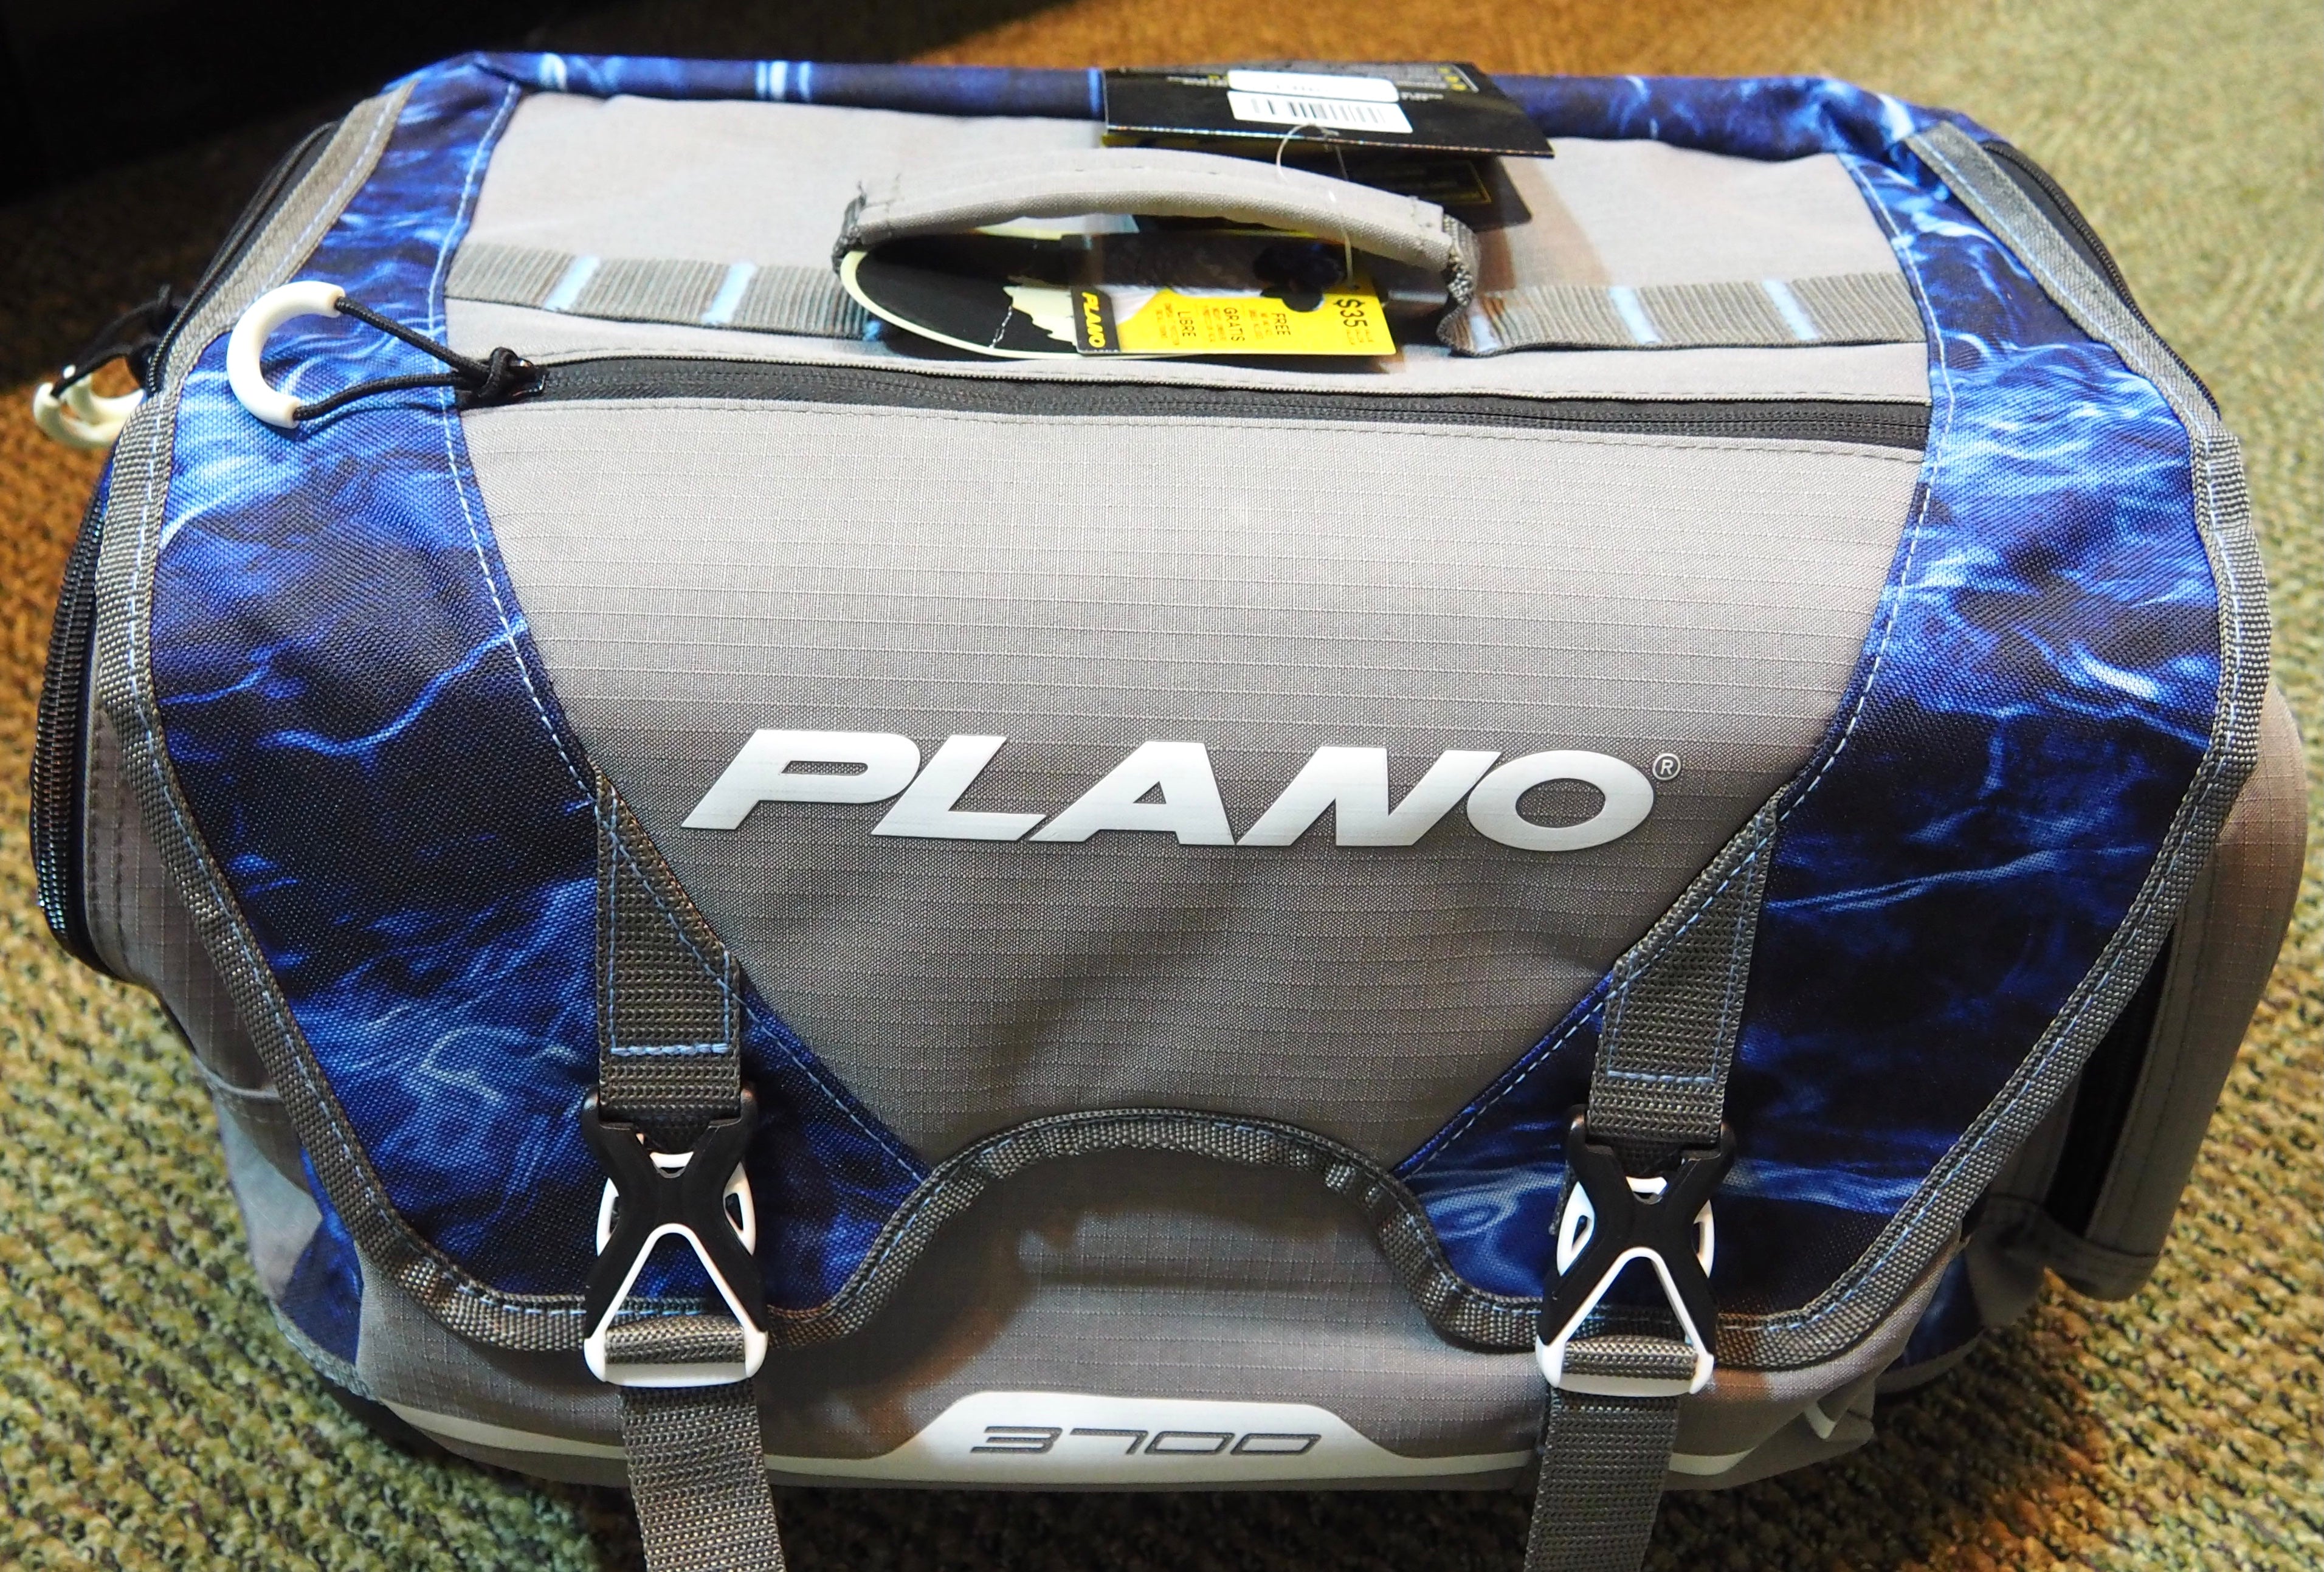 Fishing Storage and Hunting Storage from Plano. Protect Your Passion. -  Plano